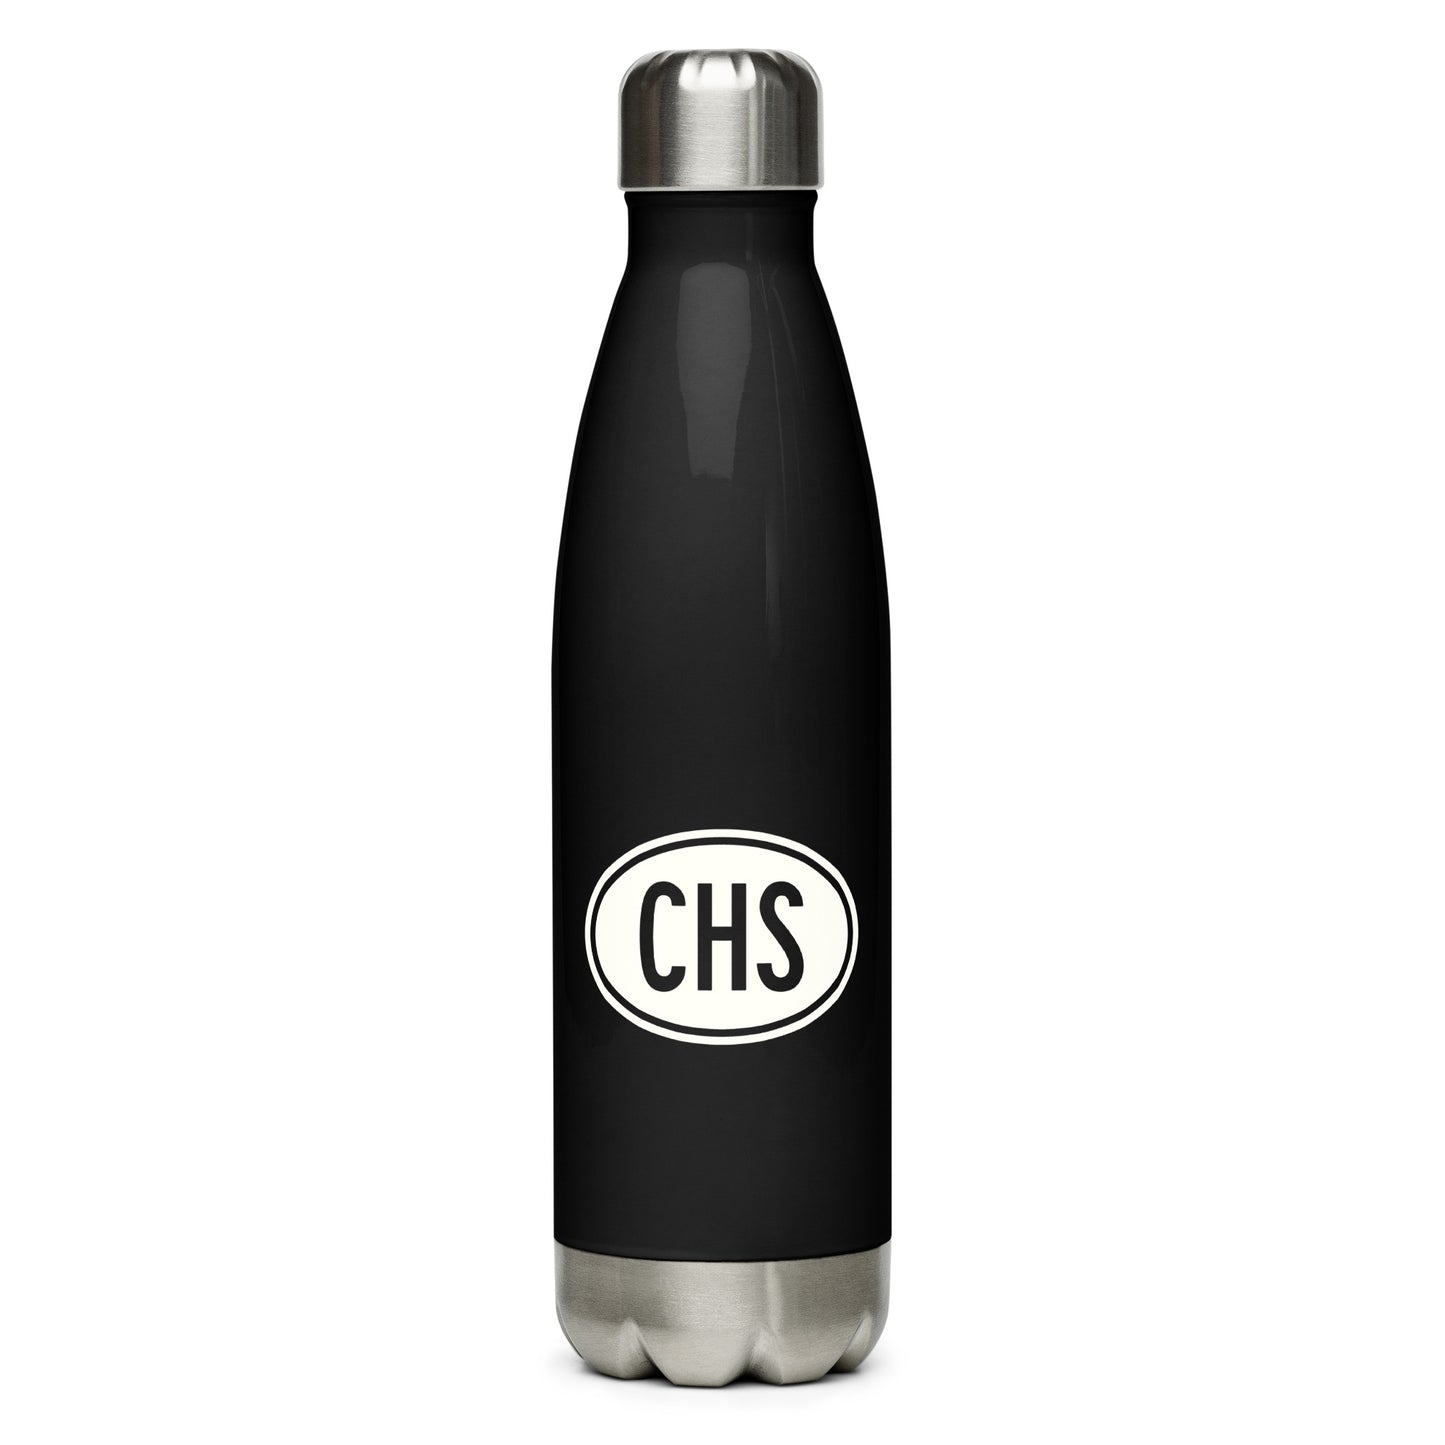 Unique Travel Gift Water Bottle - White Oval • CHS Charleston • YHM Designs - Image 01